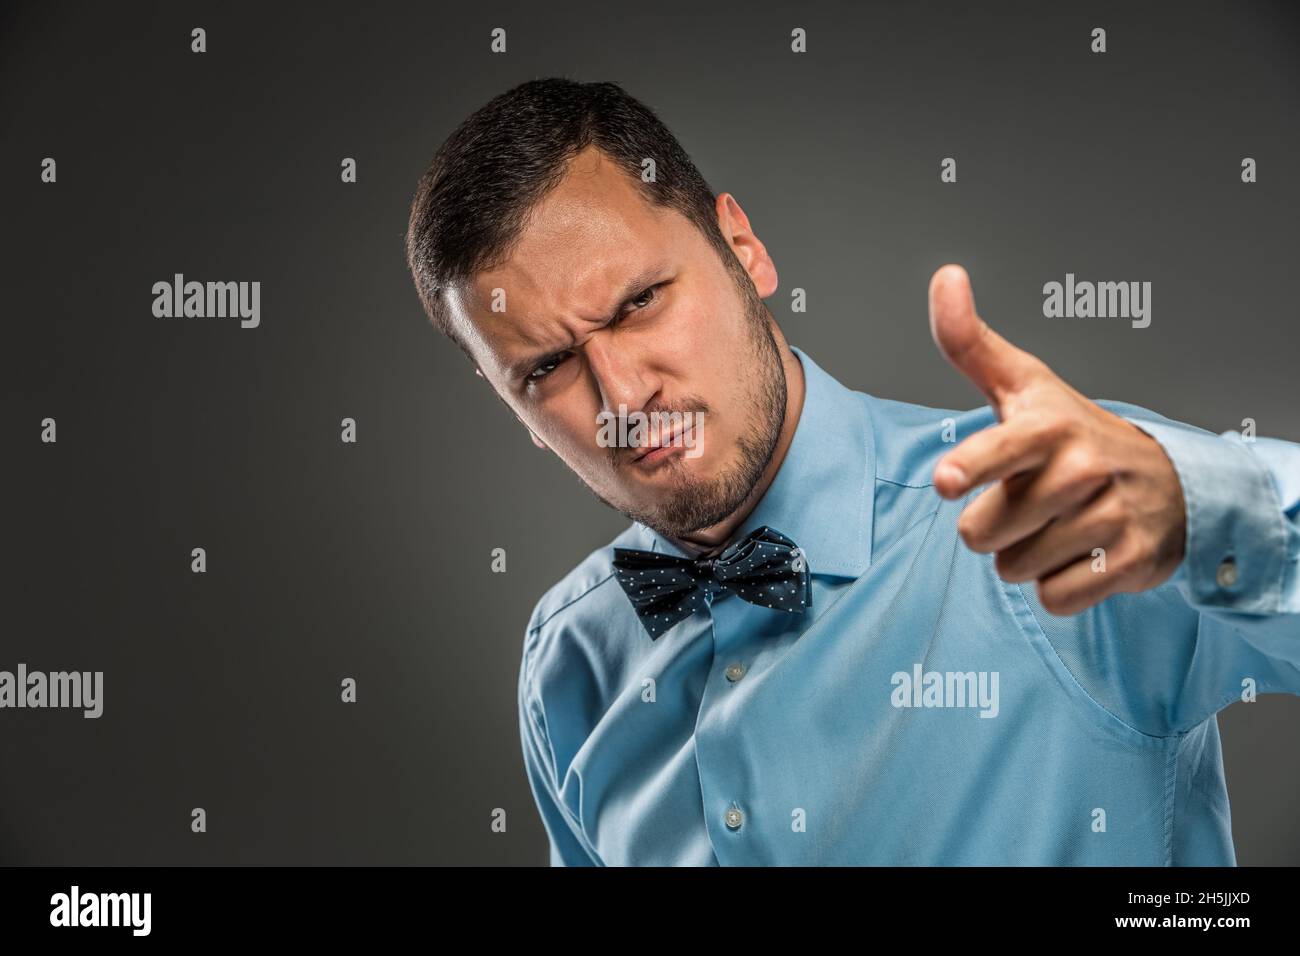 Portrait angry upset young man in blue shirt, butterfly tie Stock Photo